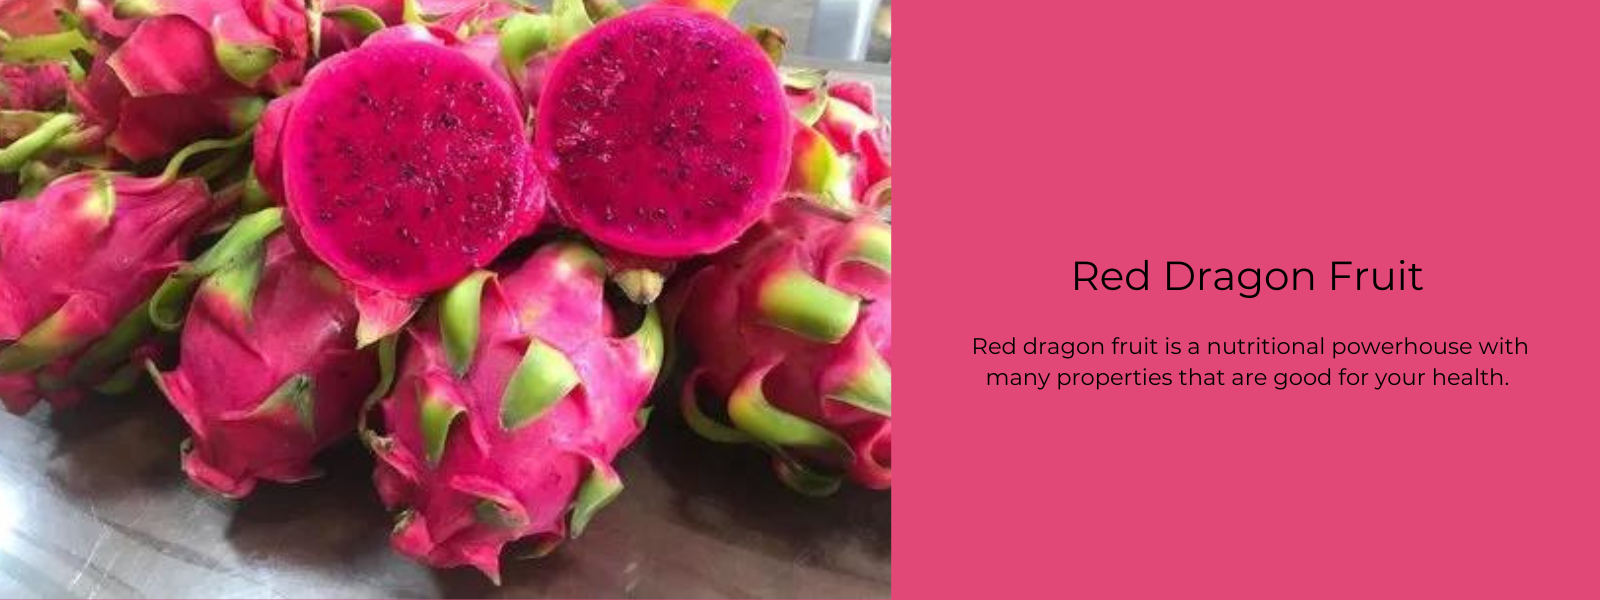 Red Dragon Fruit - Health Benefits, Uses and Important Facts